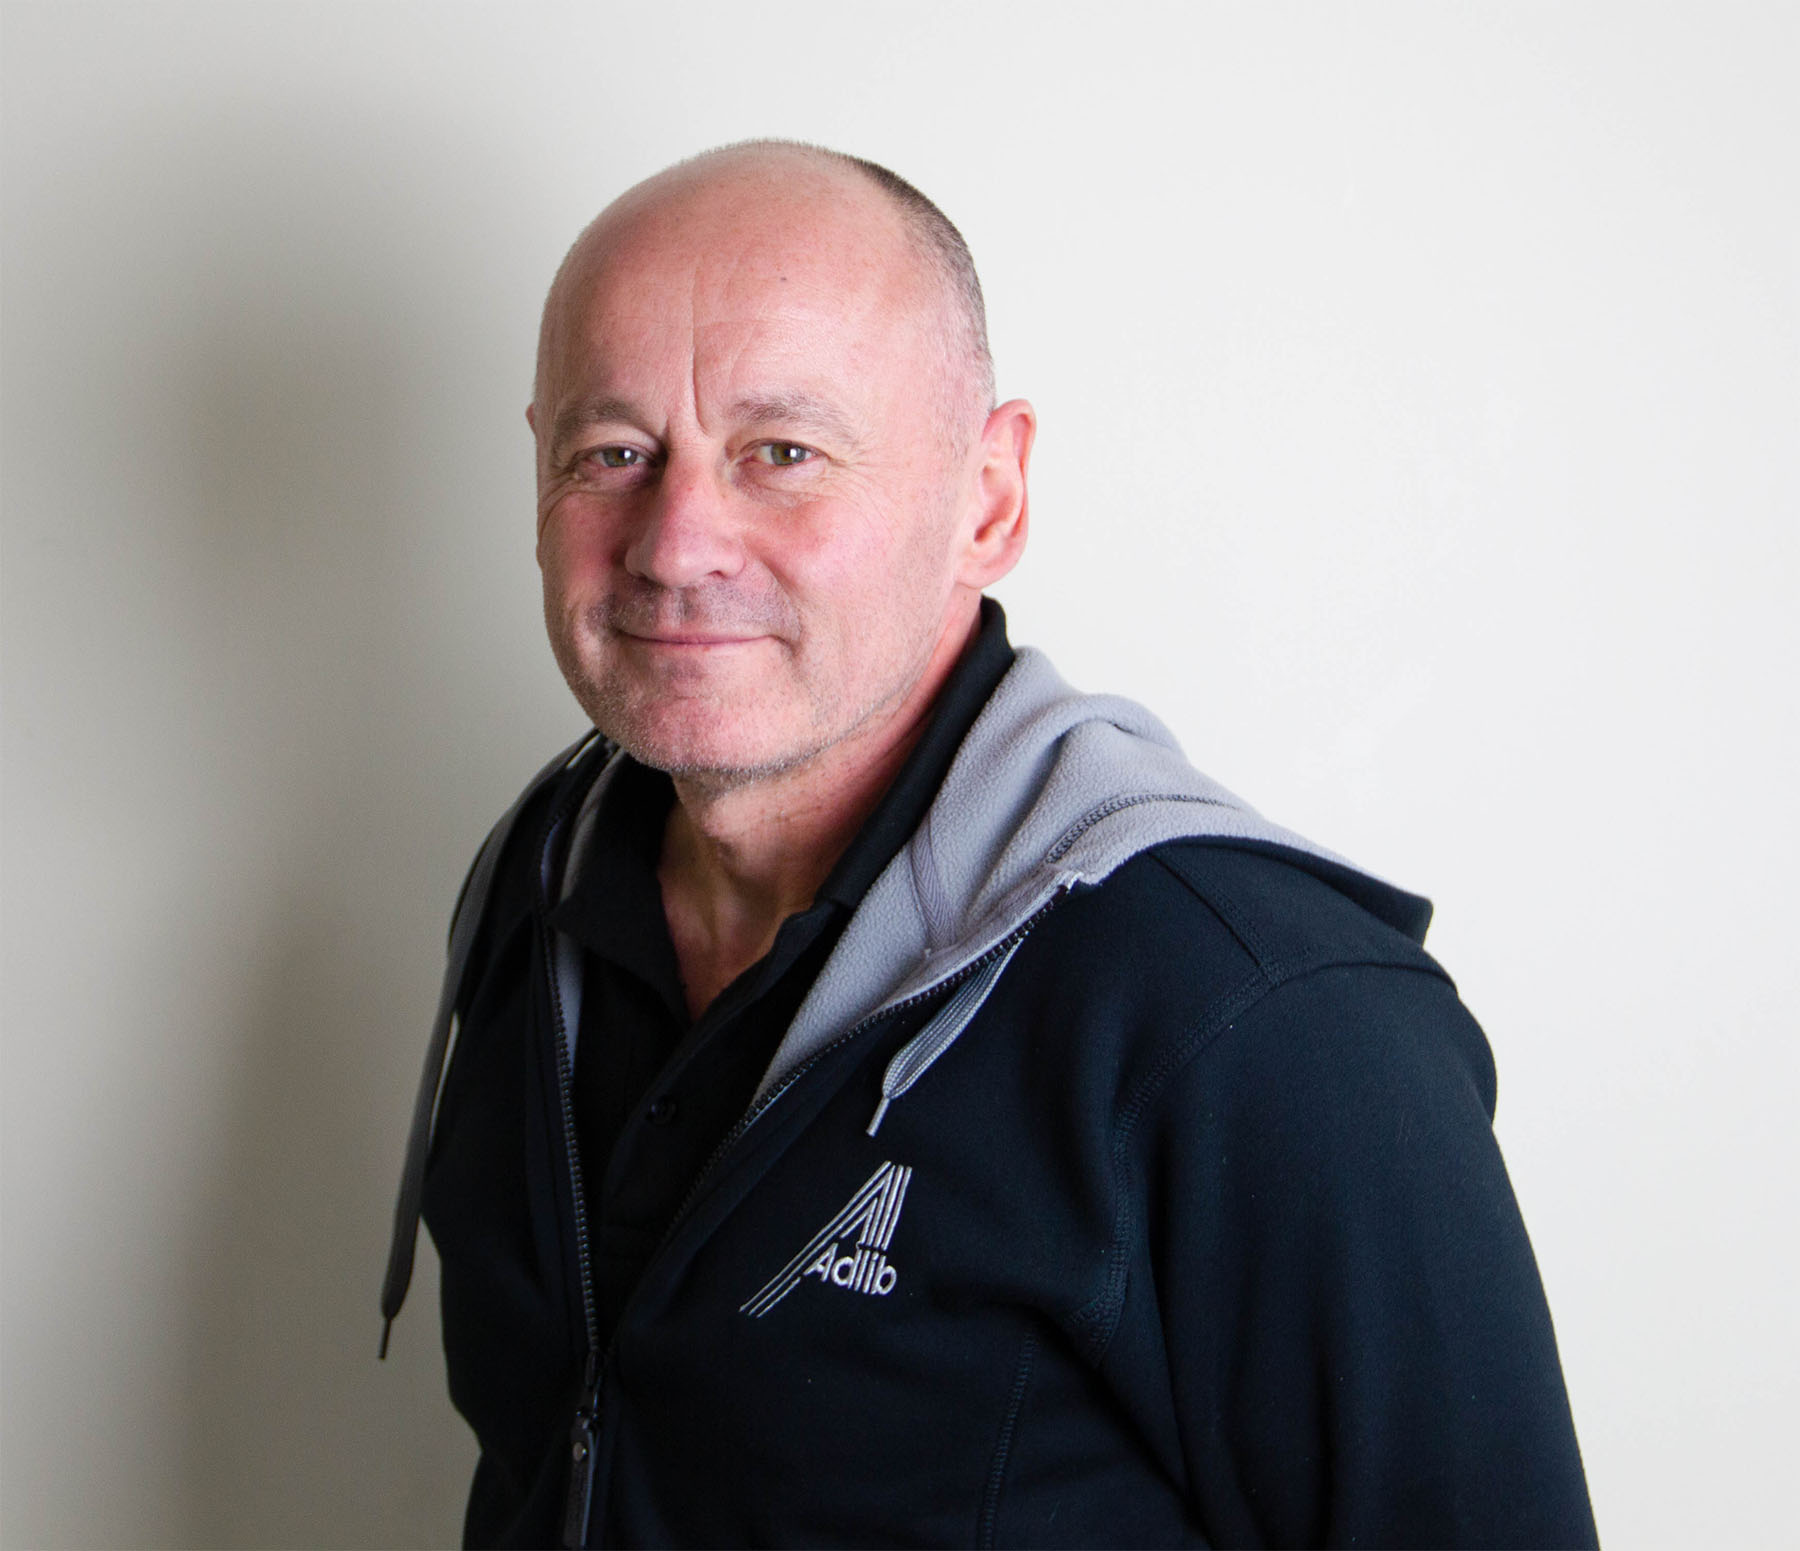 As head of special projects, Tony Griffiths will be based at Adlib’s Liverpool HQ